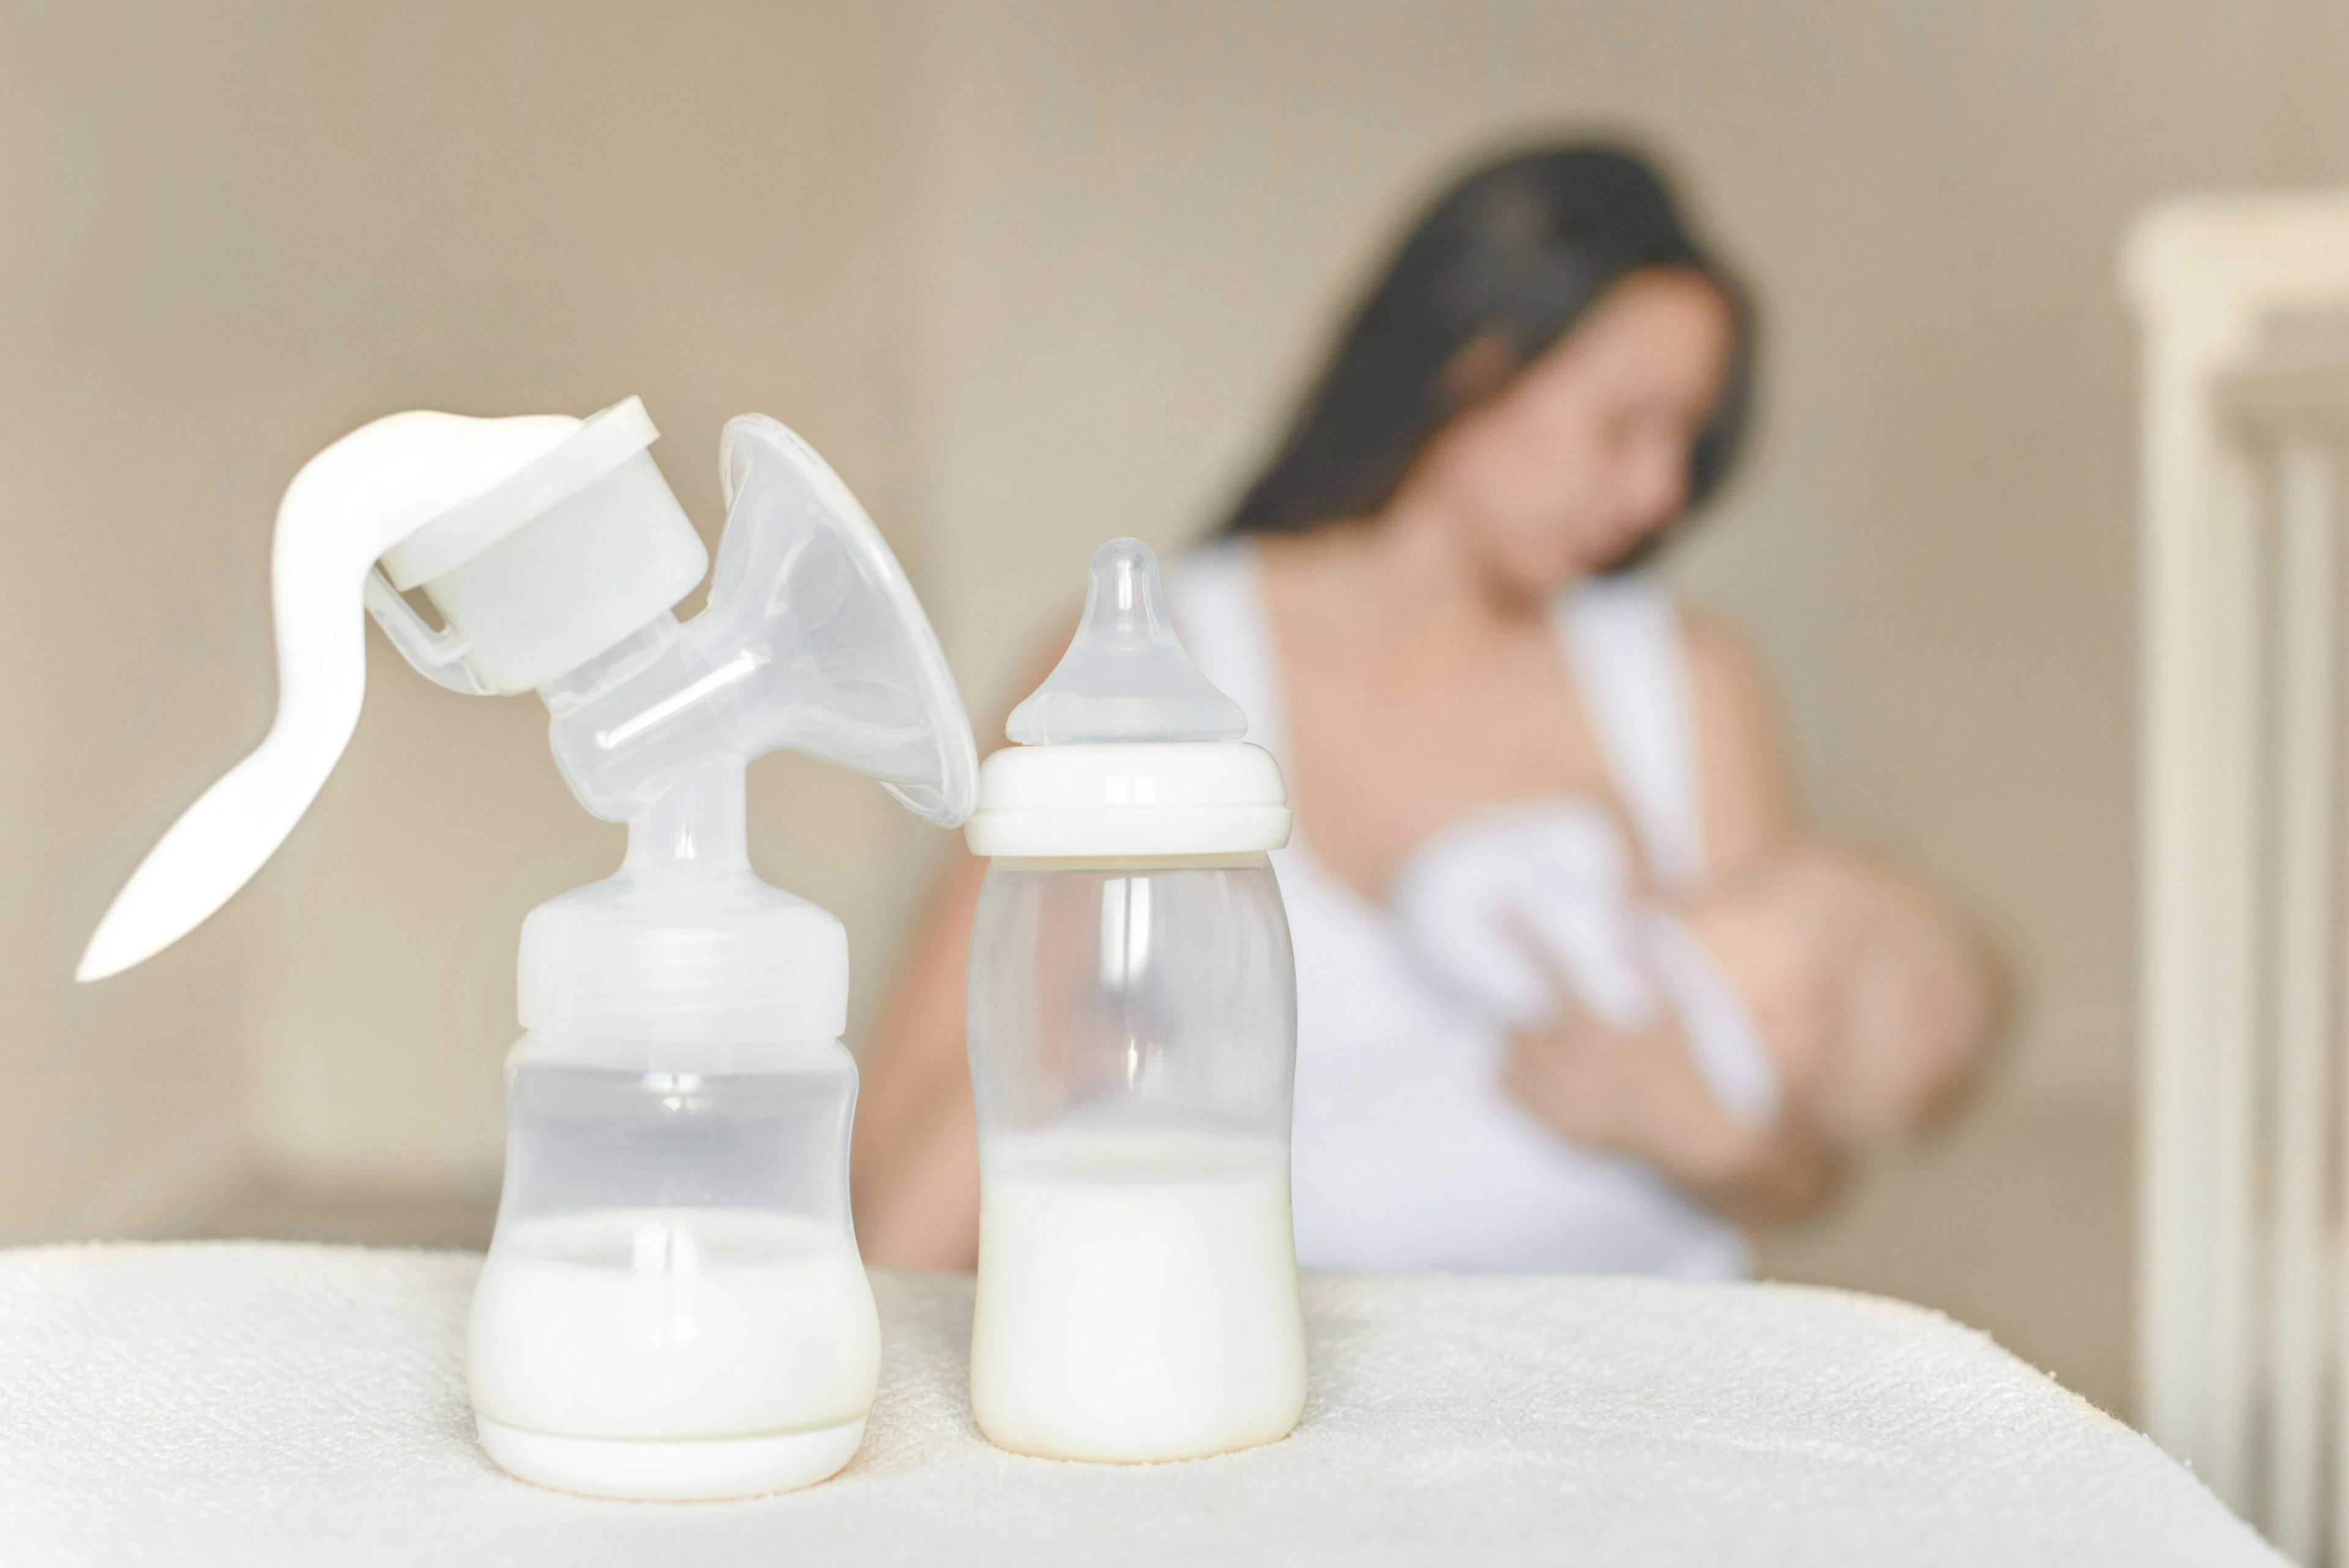 Using a mother’s own milk to help extremely preterm infants